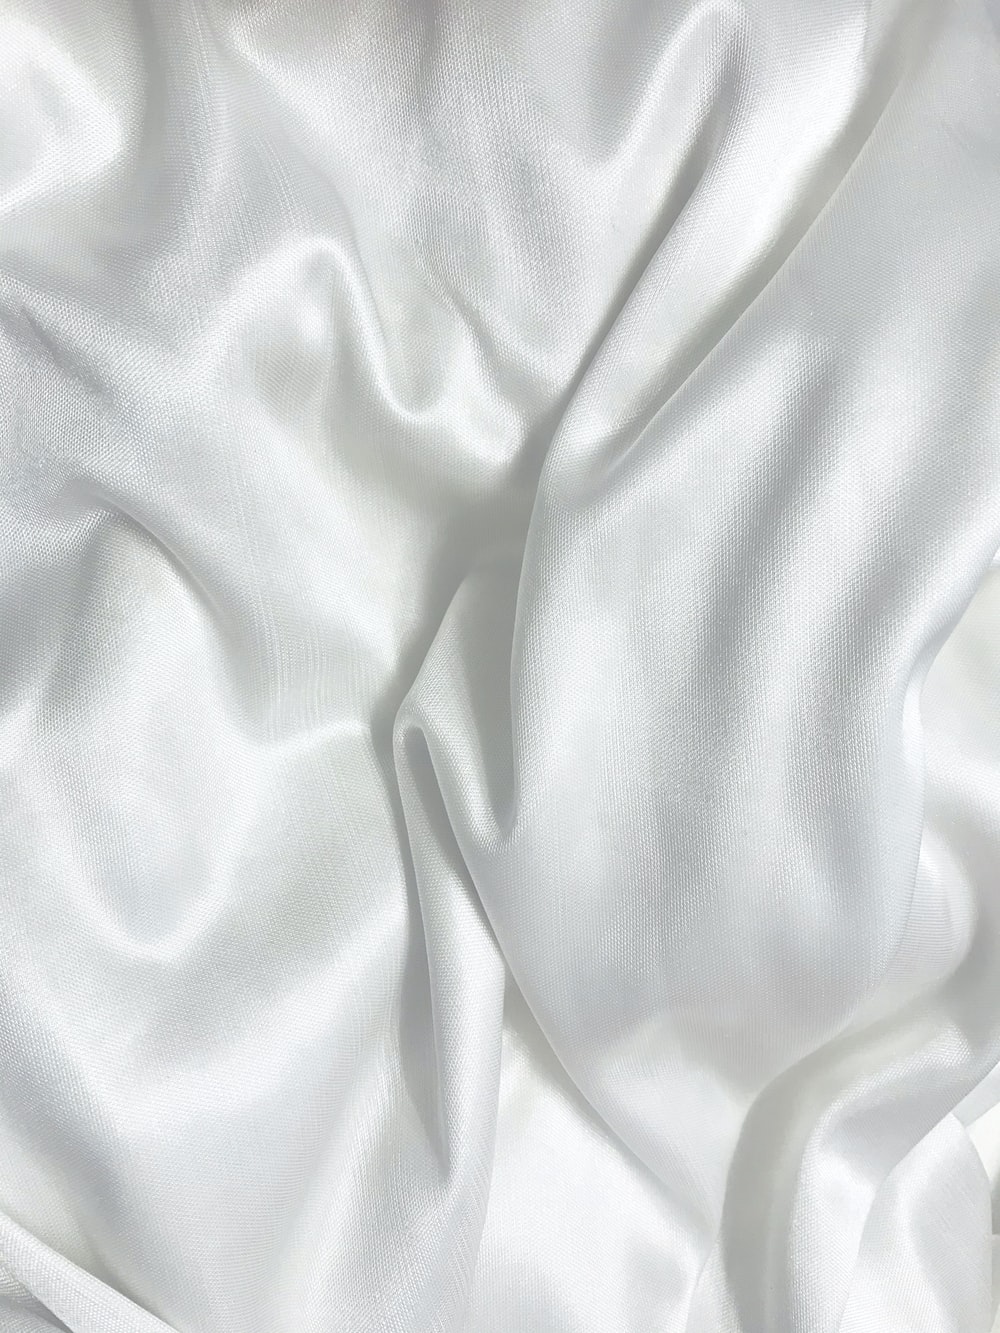 Silk Fabric Picture. Download Free Image